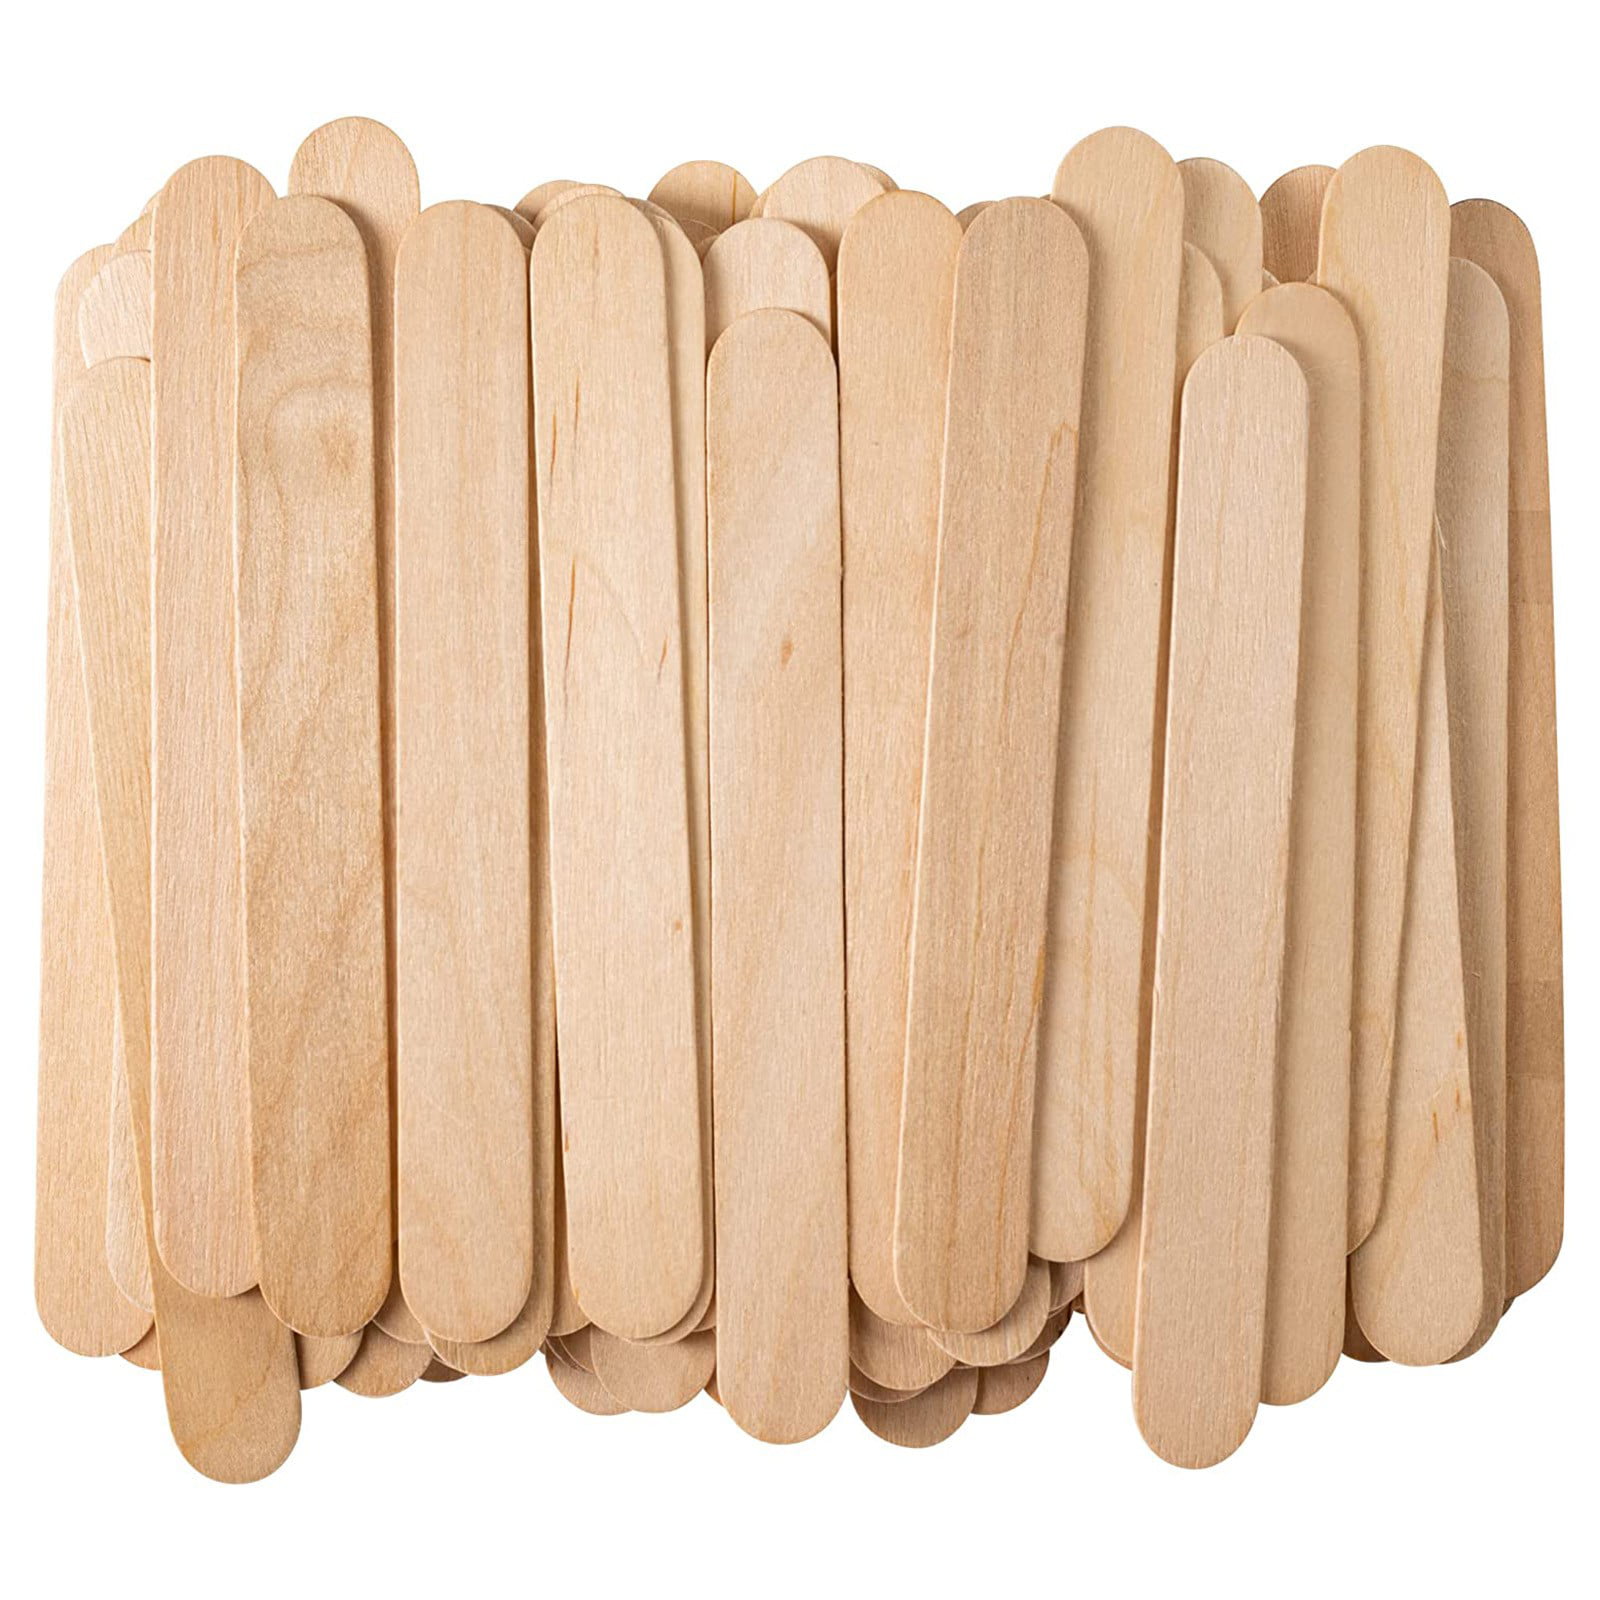 1000 Count] 4.5 Inch Wooden Multi-Purpose Popsicle Sticks for Crafts, ICES,  Ice Cream, Wax, Waxing, Tongue Depressor Wood Sticks – SJC Fusion